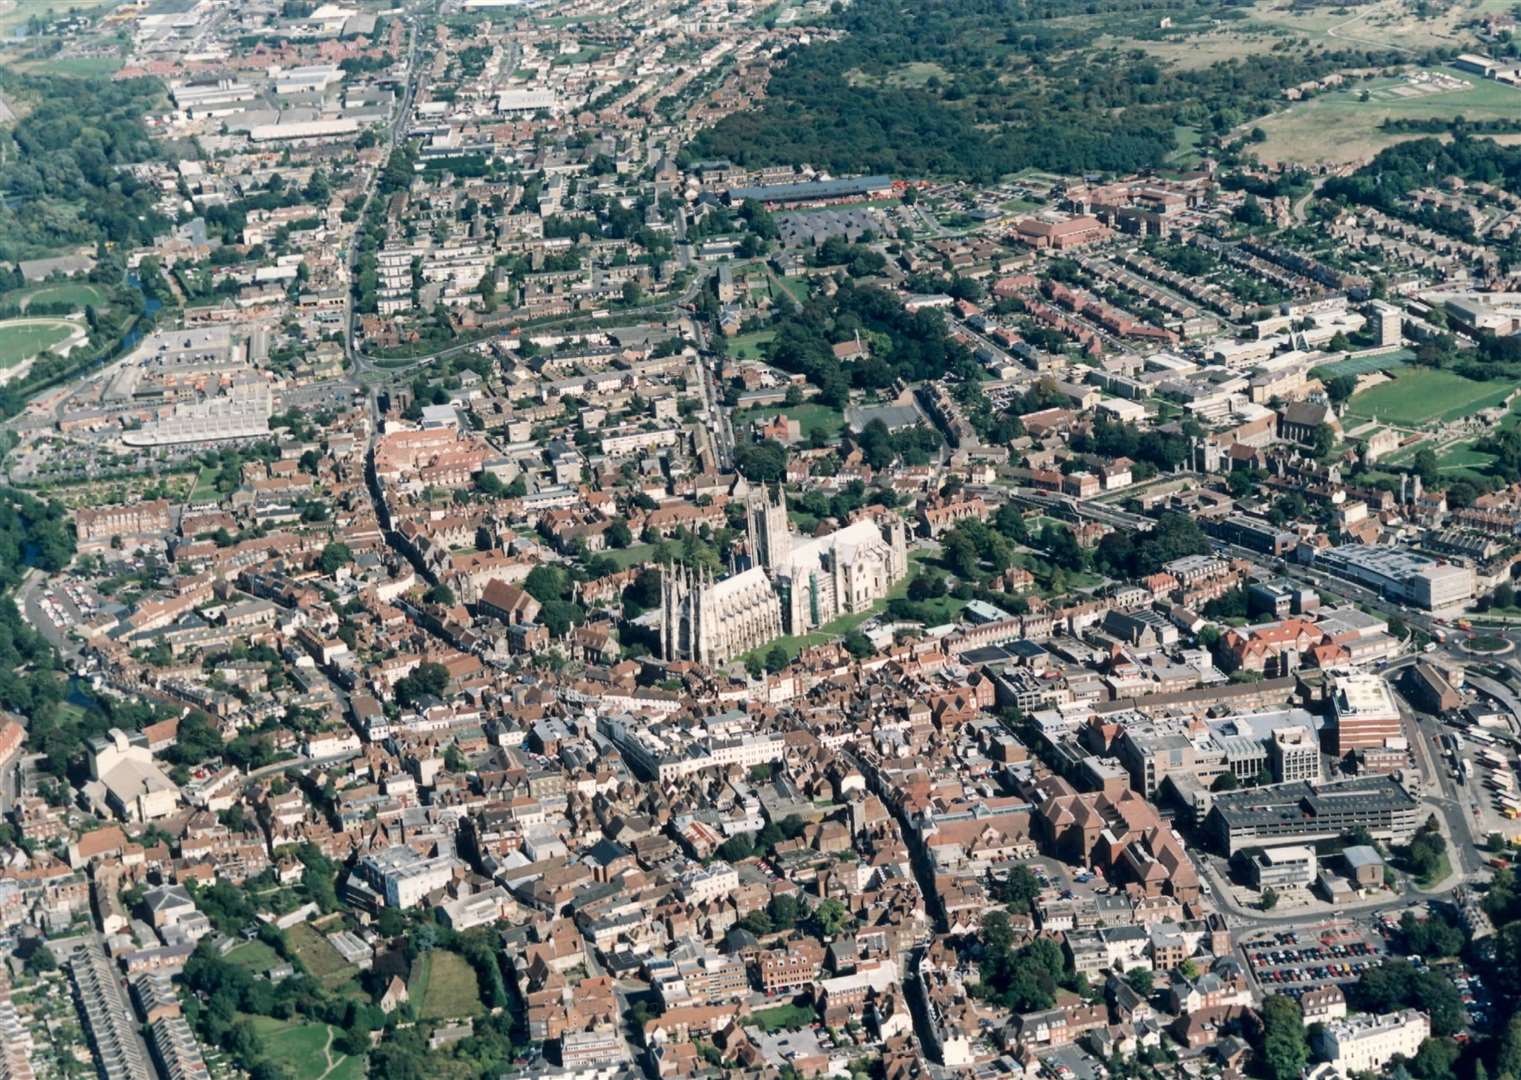 Canterbury city centre in 1995. Shopping complex Whitefriars is yet to be built